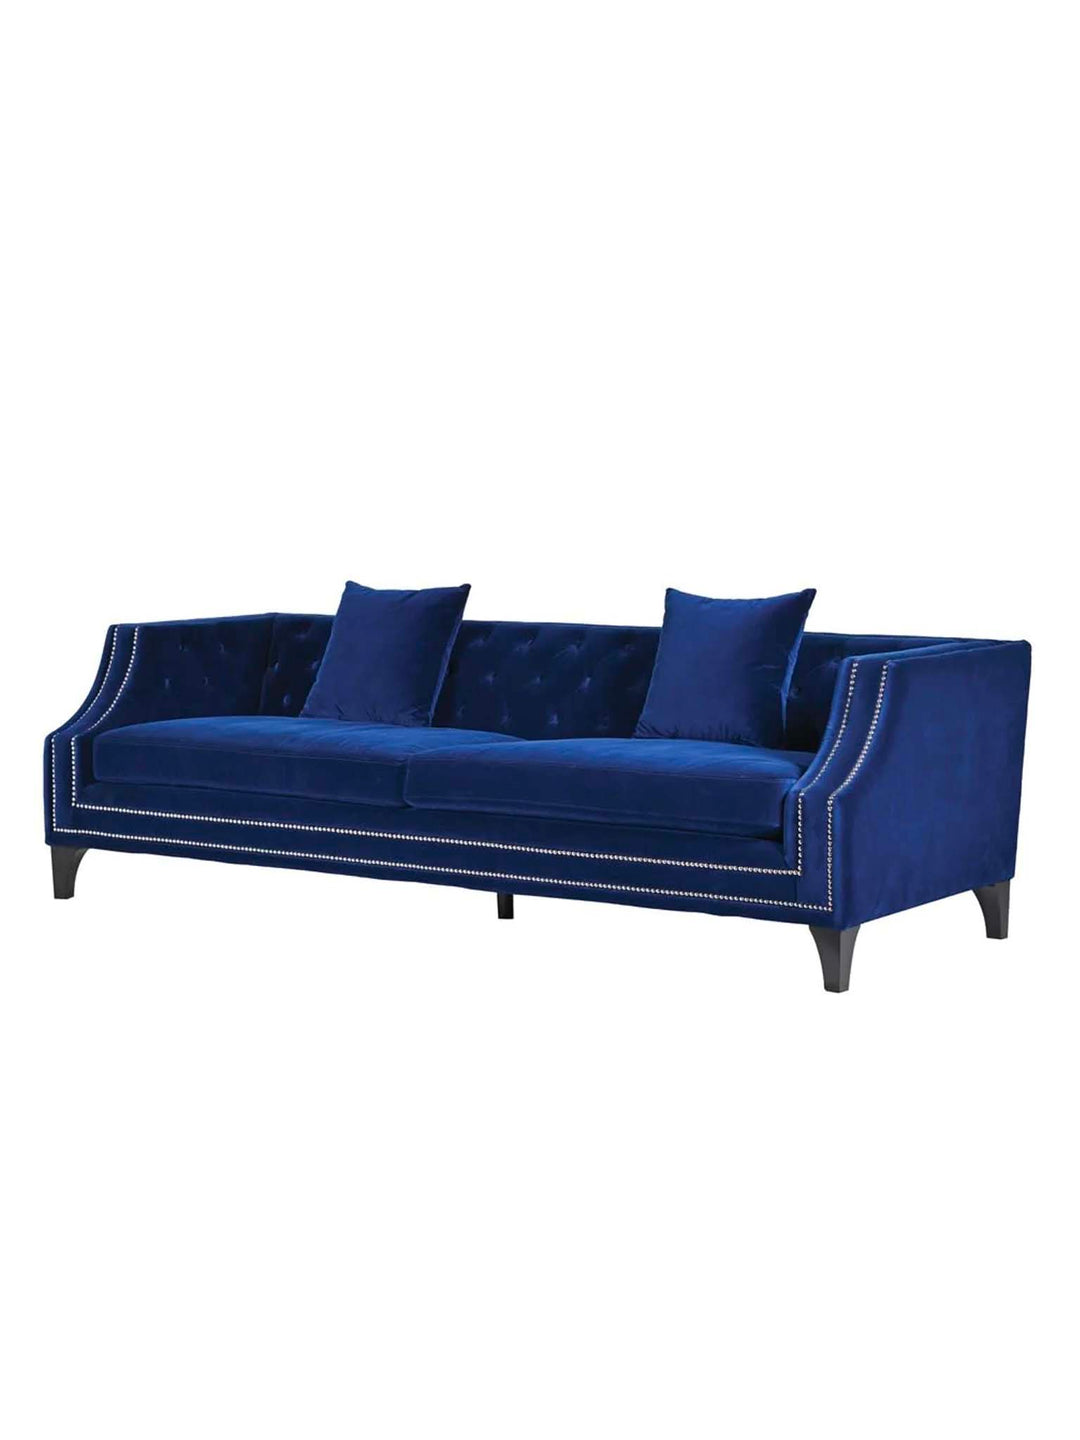 Blue Chesterfield Sofa, 3 Seater